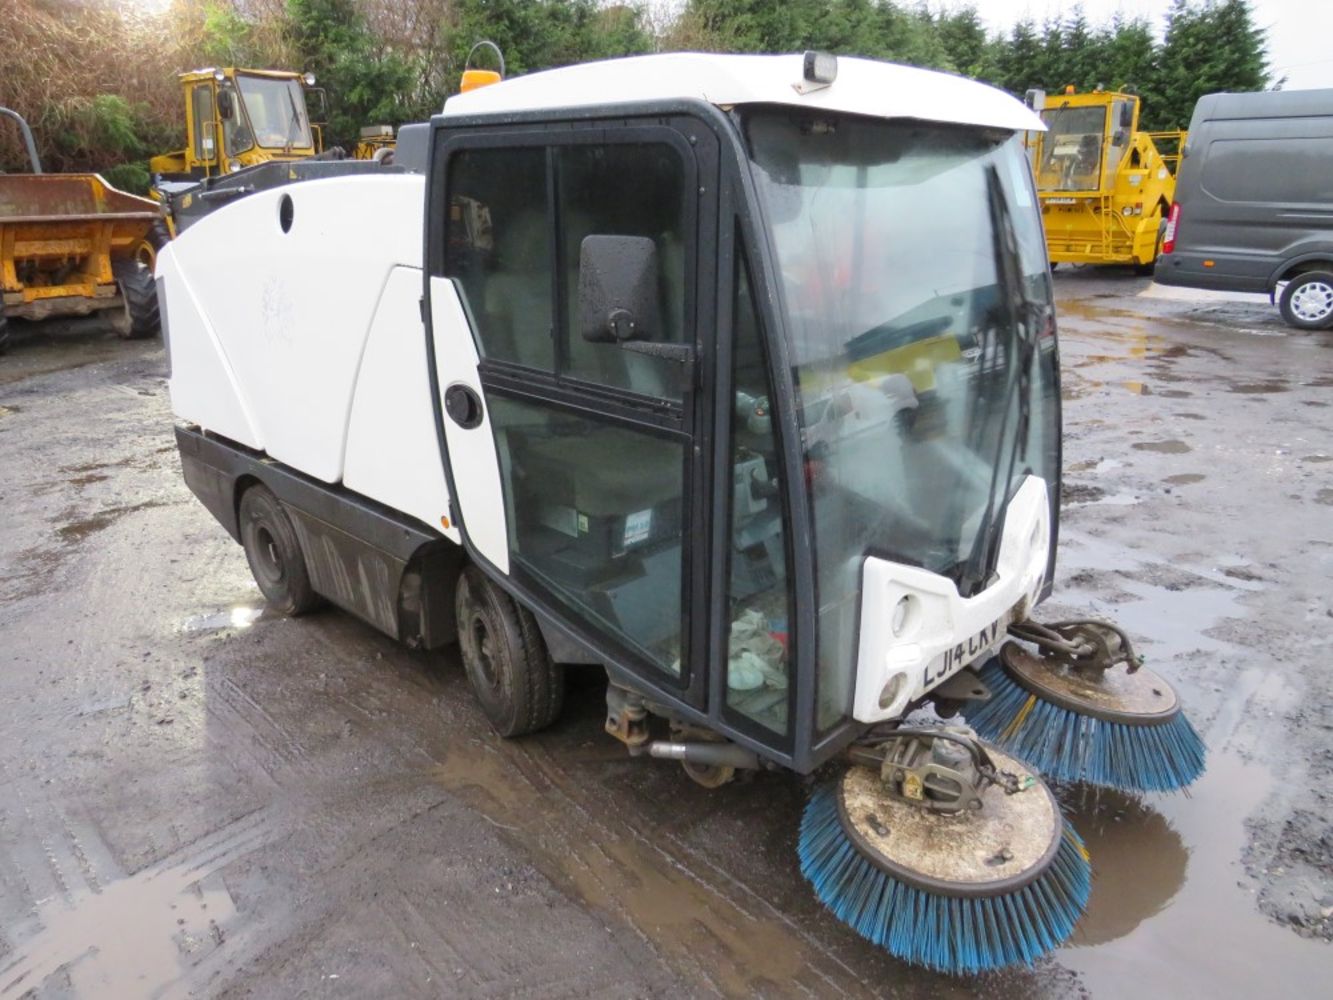 Plant, Machinery & HGV Auction, Direct council, Leasing companies, Trade & Private entries.